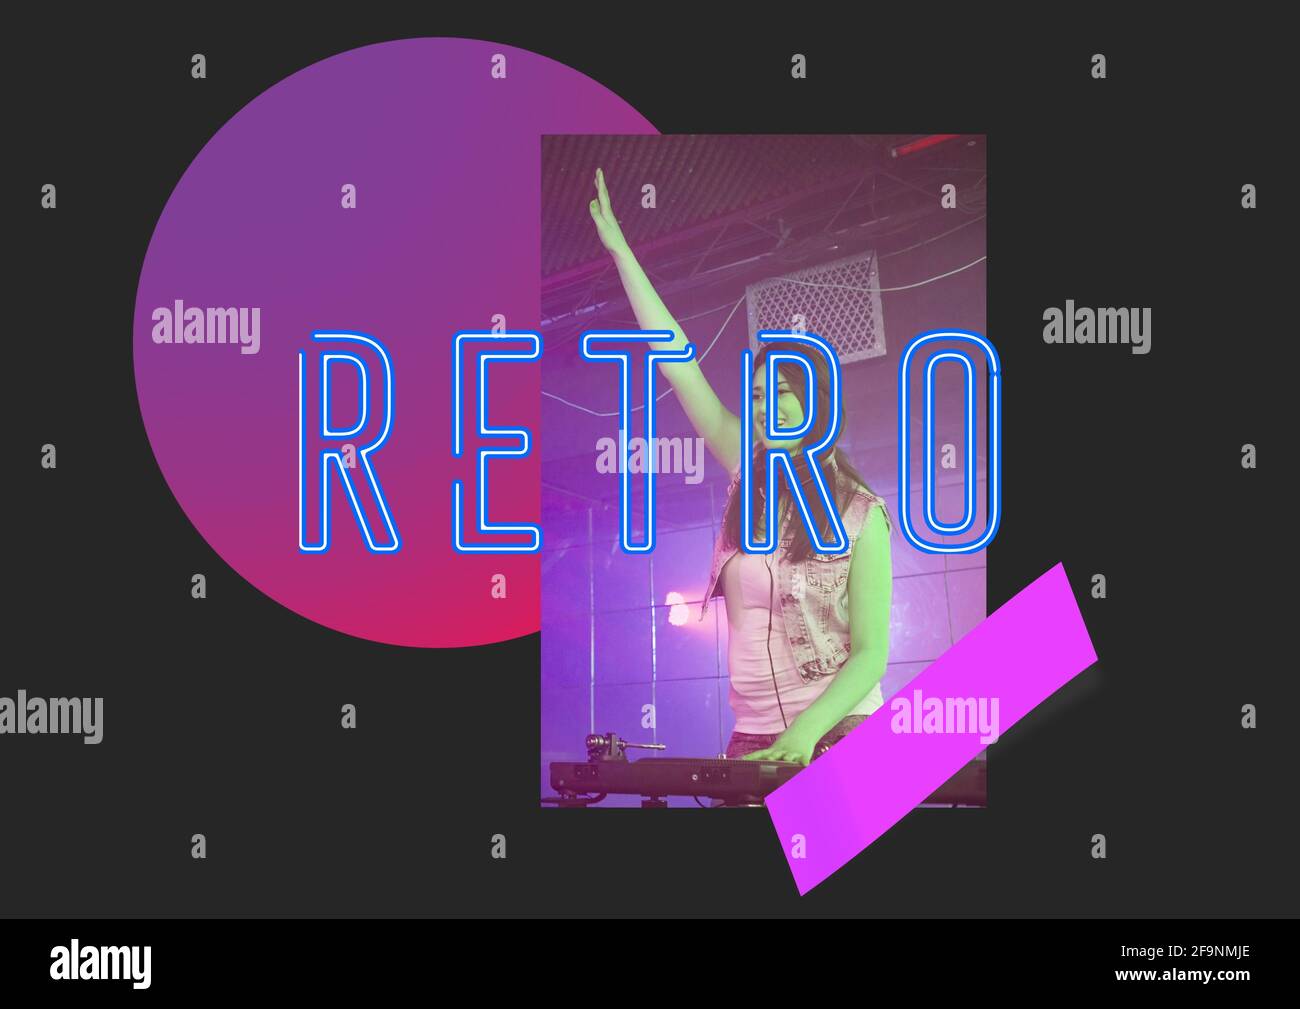 Retro text in blue neon type with female dj and purple spot on black background Stock Photo